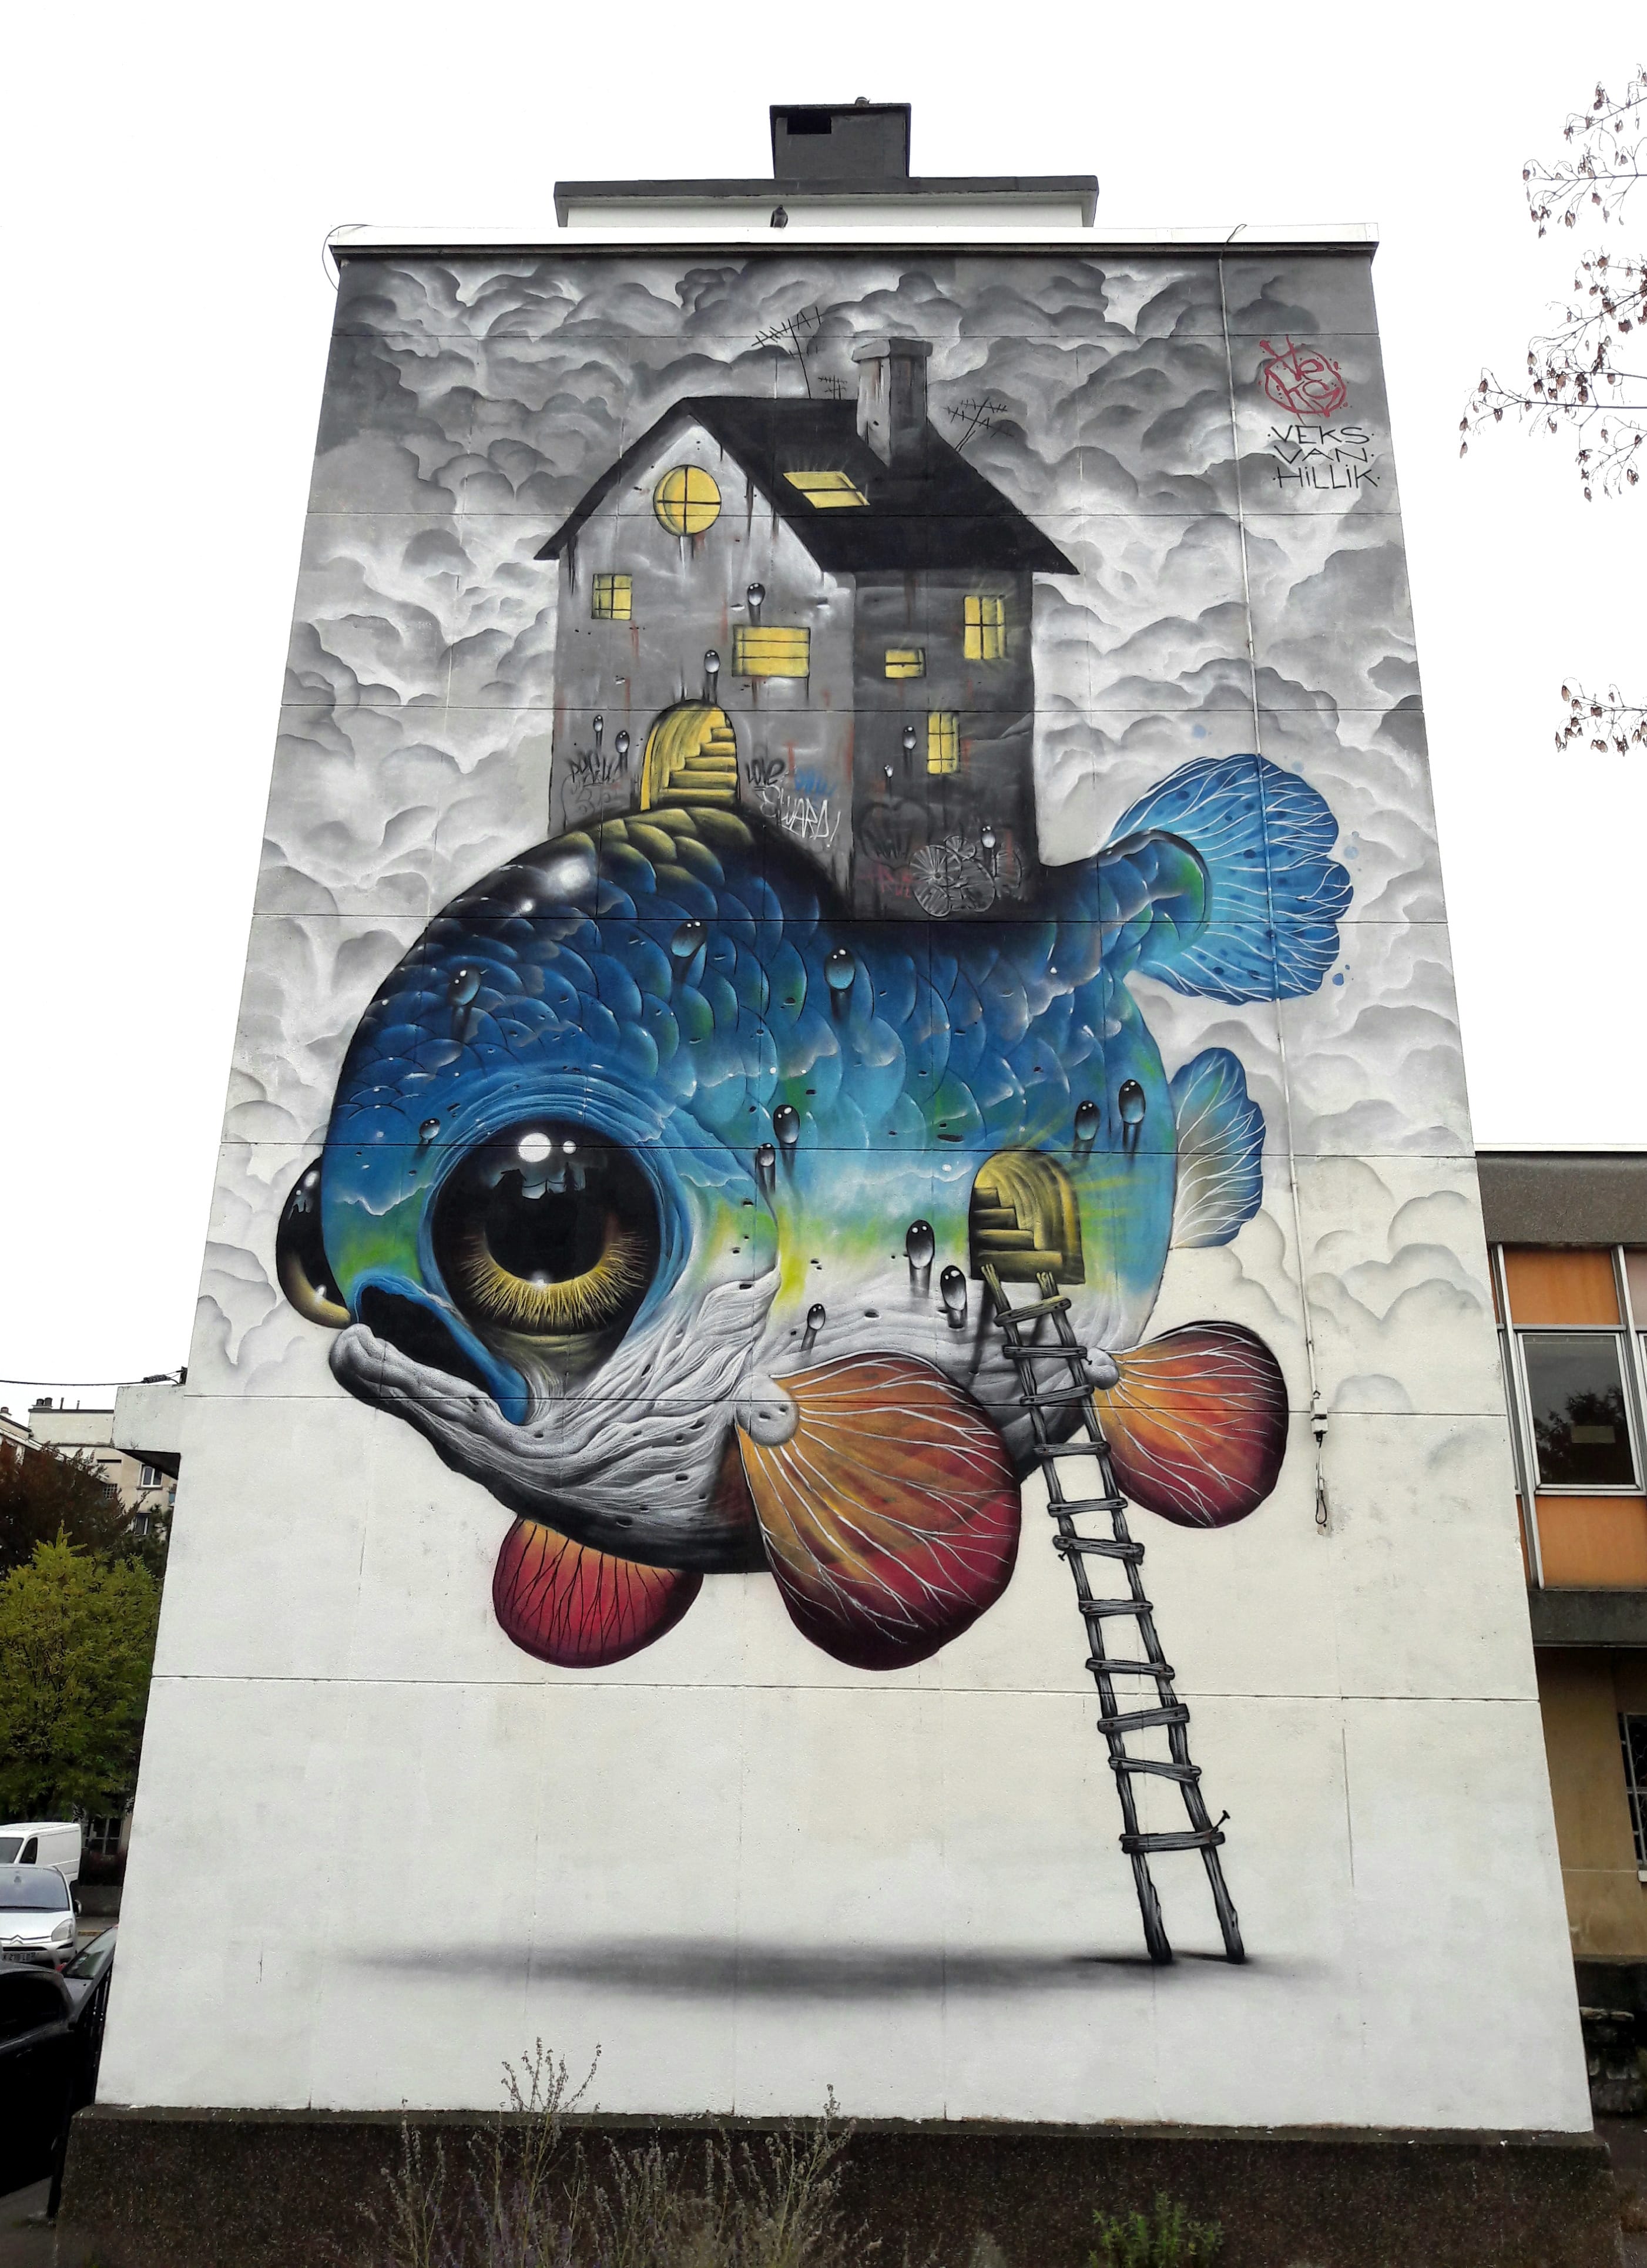 Graffiti 6297  by the artist Veks Van Hillik captured by Mephisroth in Fontaine France